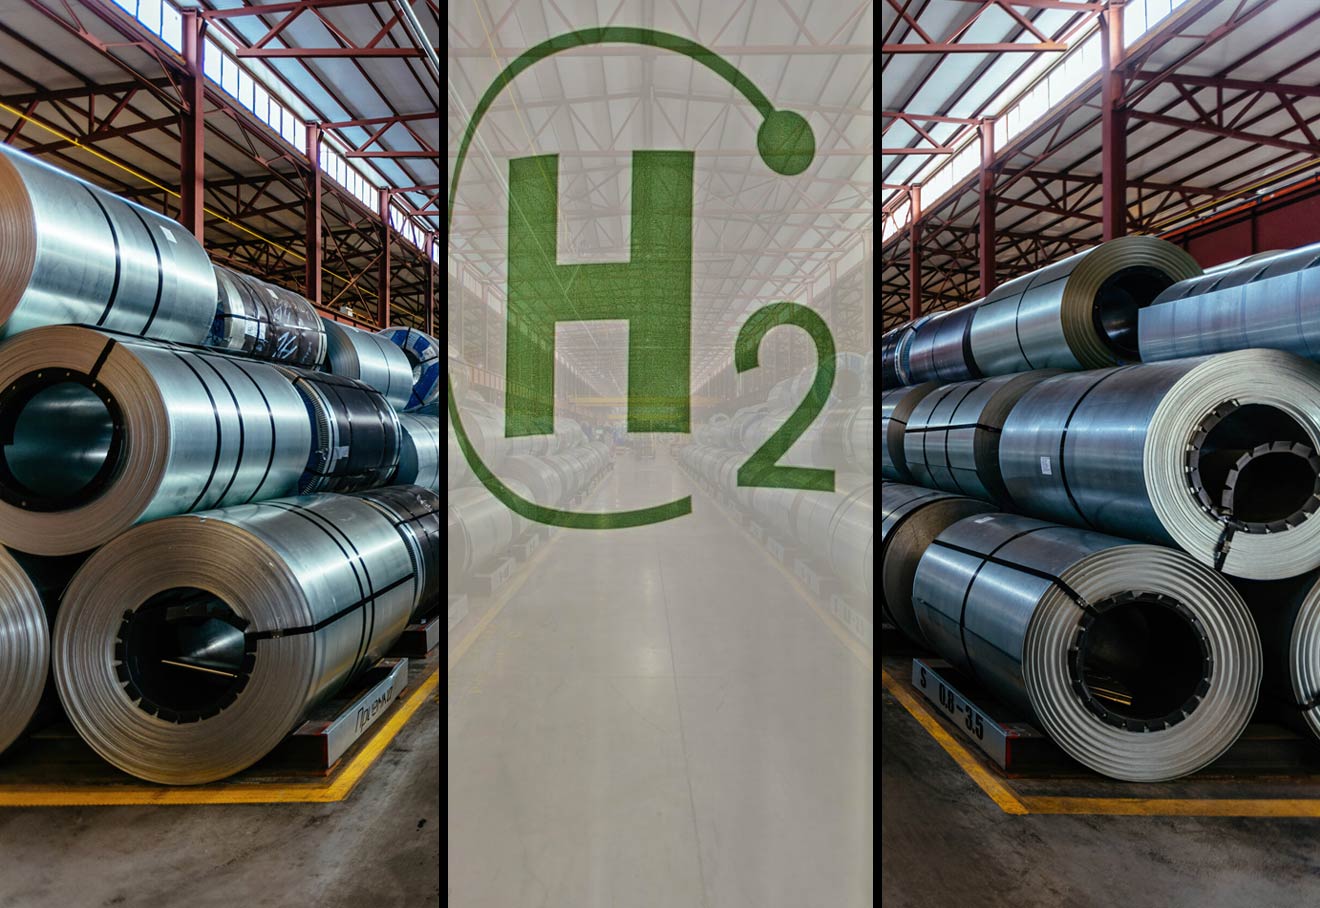 Green Hydrogen To Help India’s Steel Industry With Decarbonisation: Report